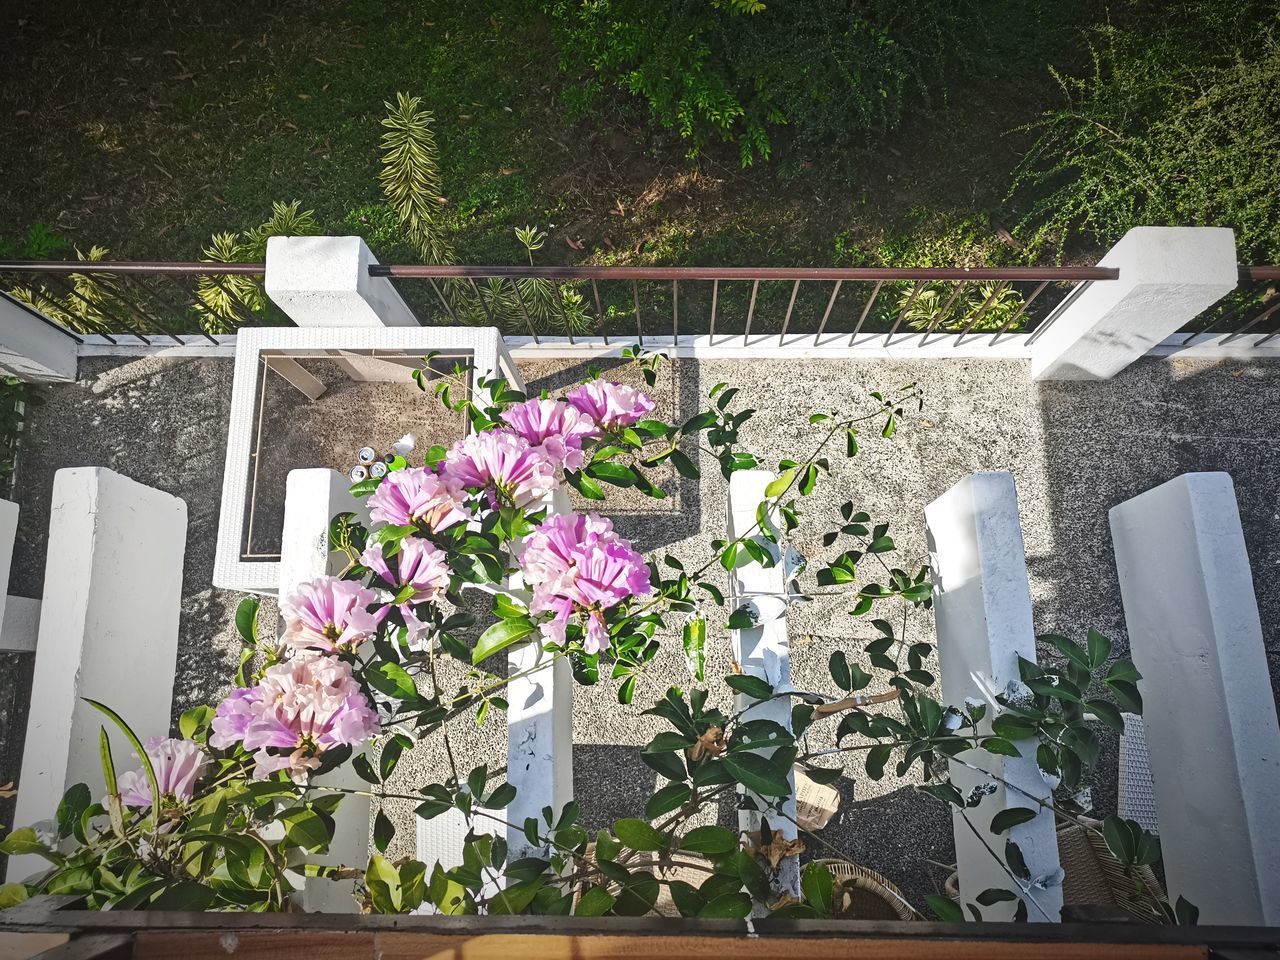 plant, flower, flowering plant, nature, grave, growth, no people, freshness, cemetery, day, beauty in nature, high angle view, outdoors, backyard, front or back yard, potted plant, architecture, floristry, garden, arrangement, fragility, flowerpot, table, sunlight, seat, yard